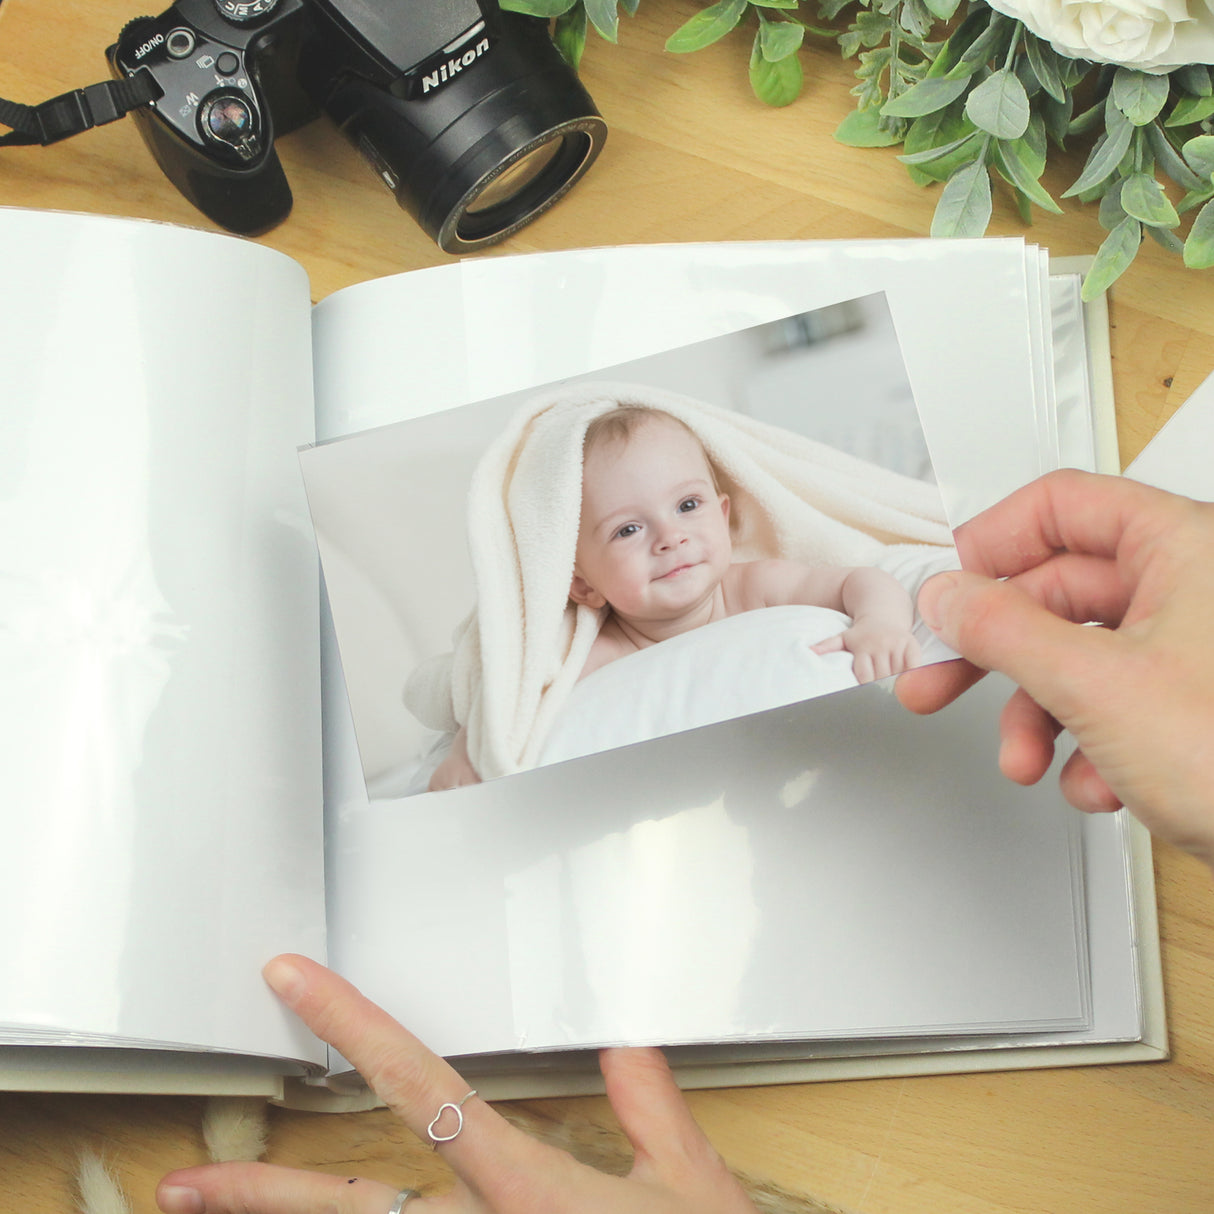 Personalised Truly Blessed Christening Square Photo Album